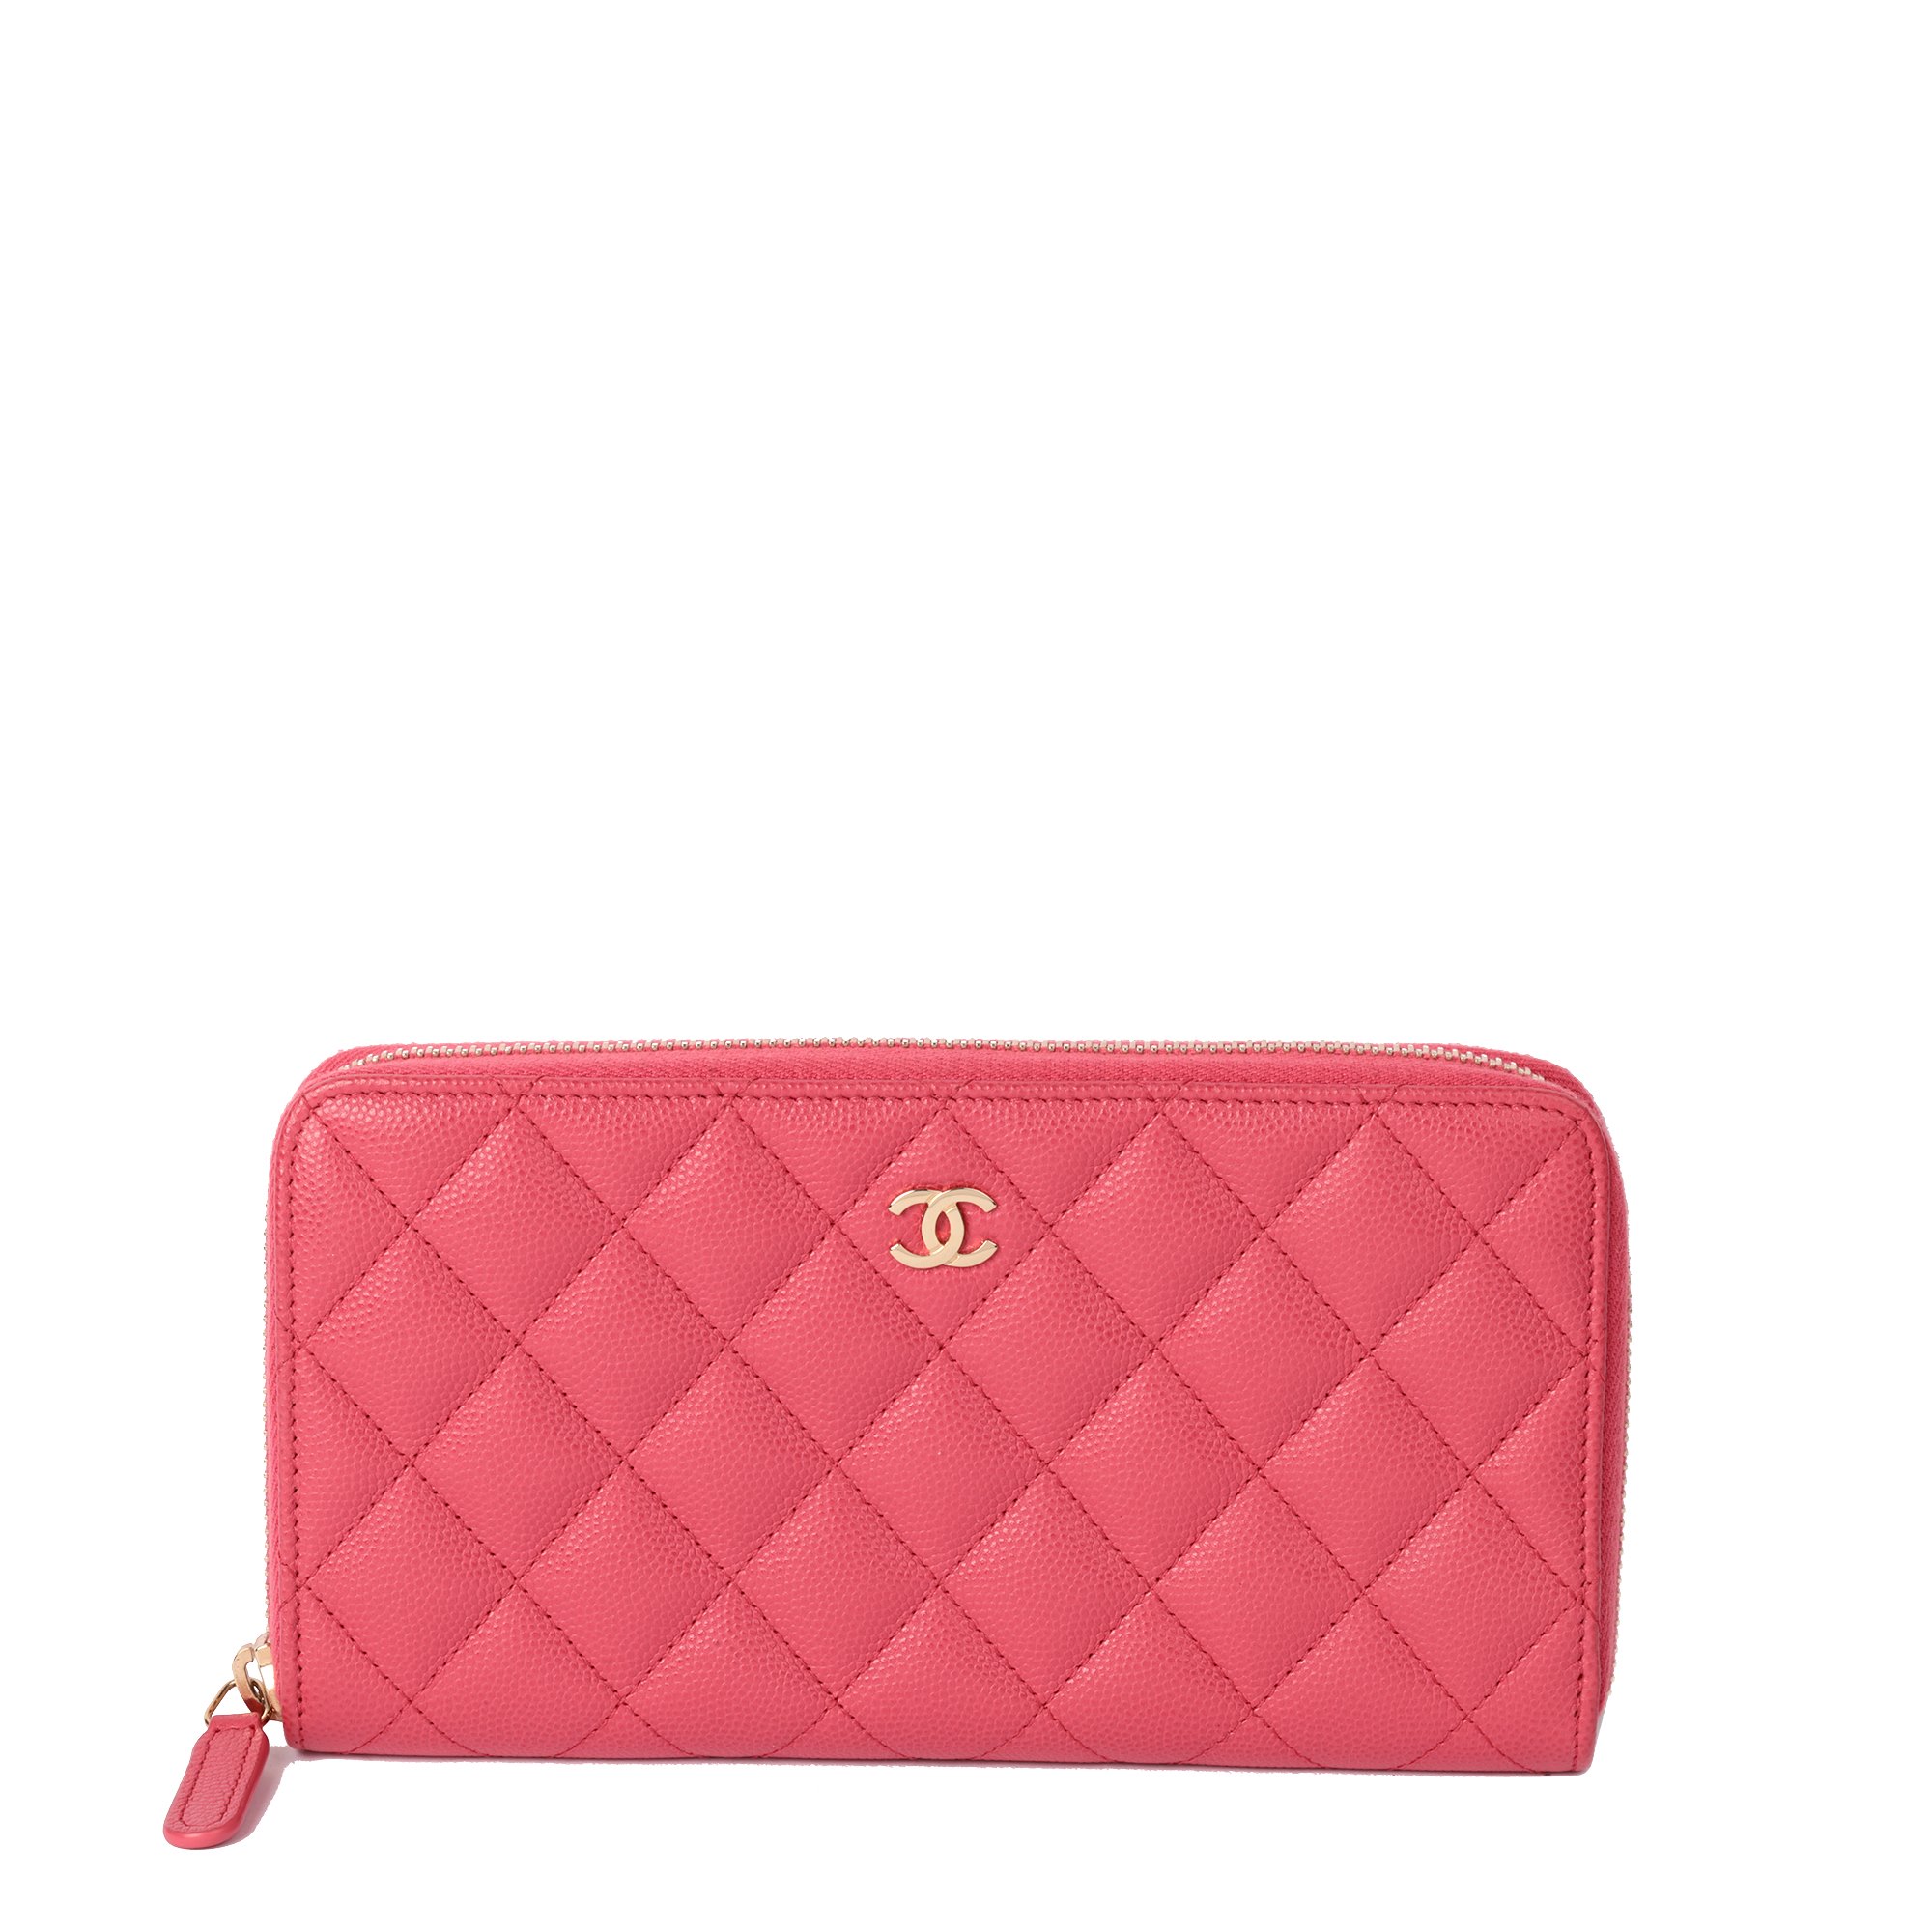 Chanel Pink Quilted Lambskin Classic Zipped Wallet